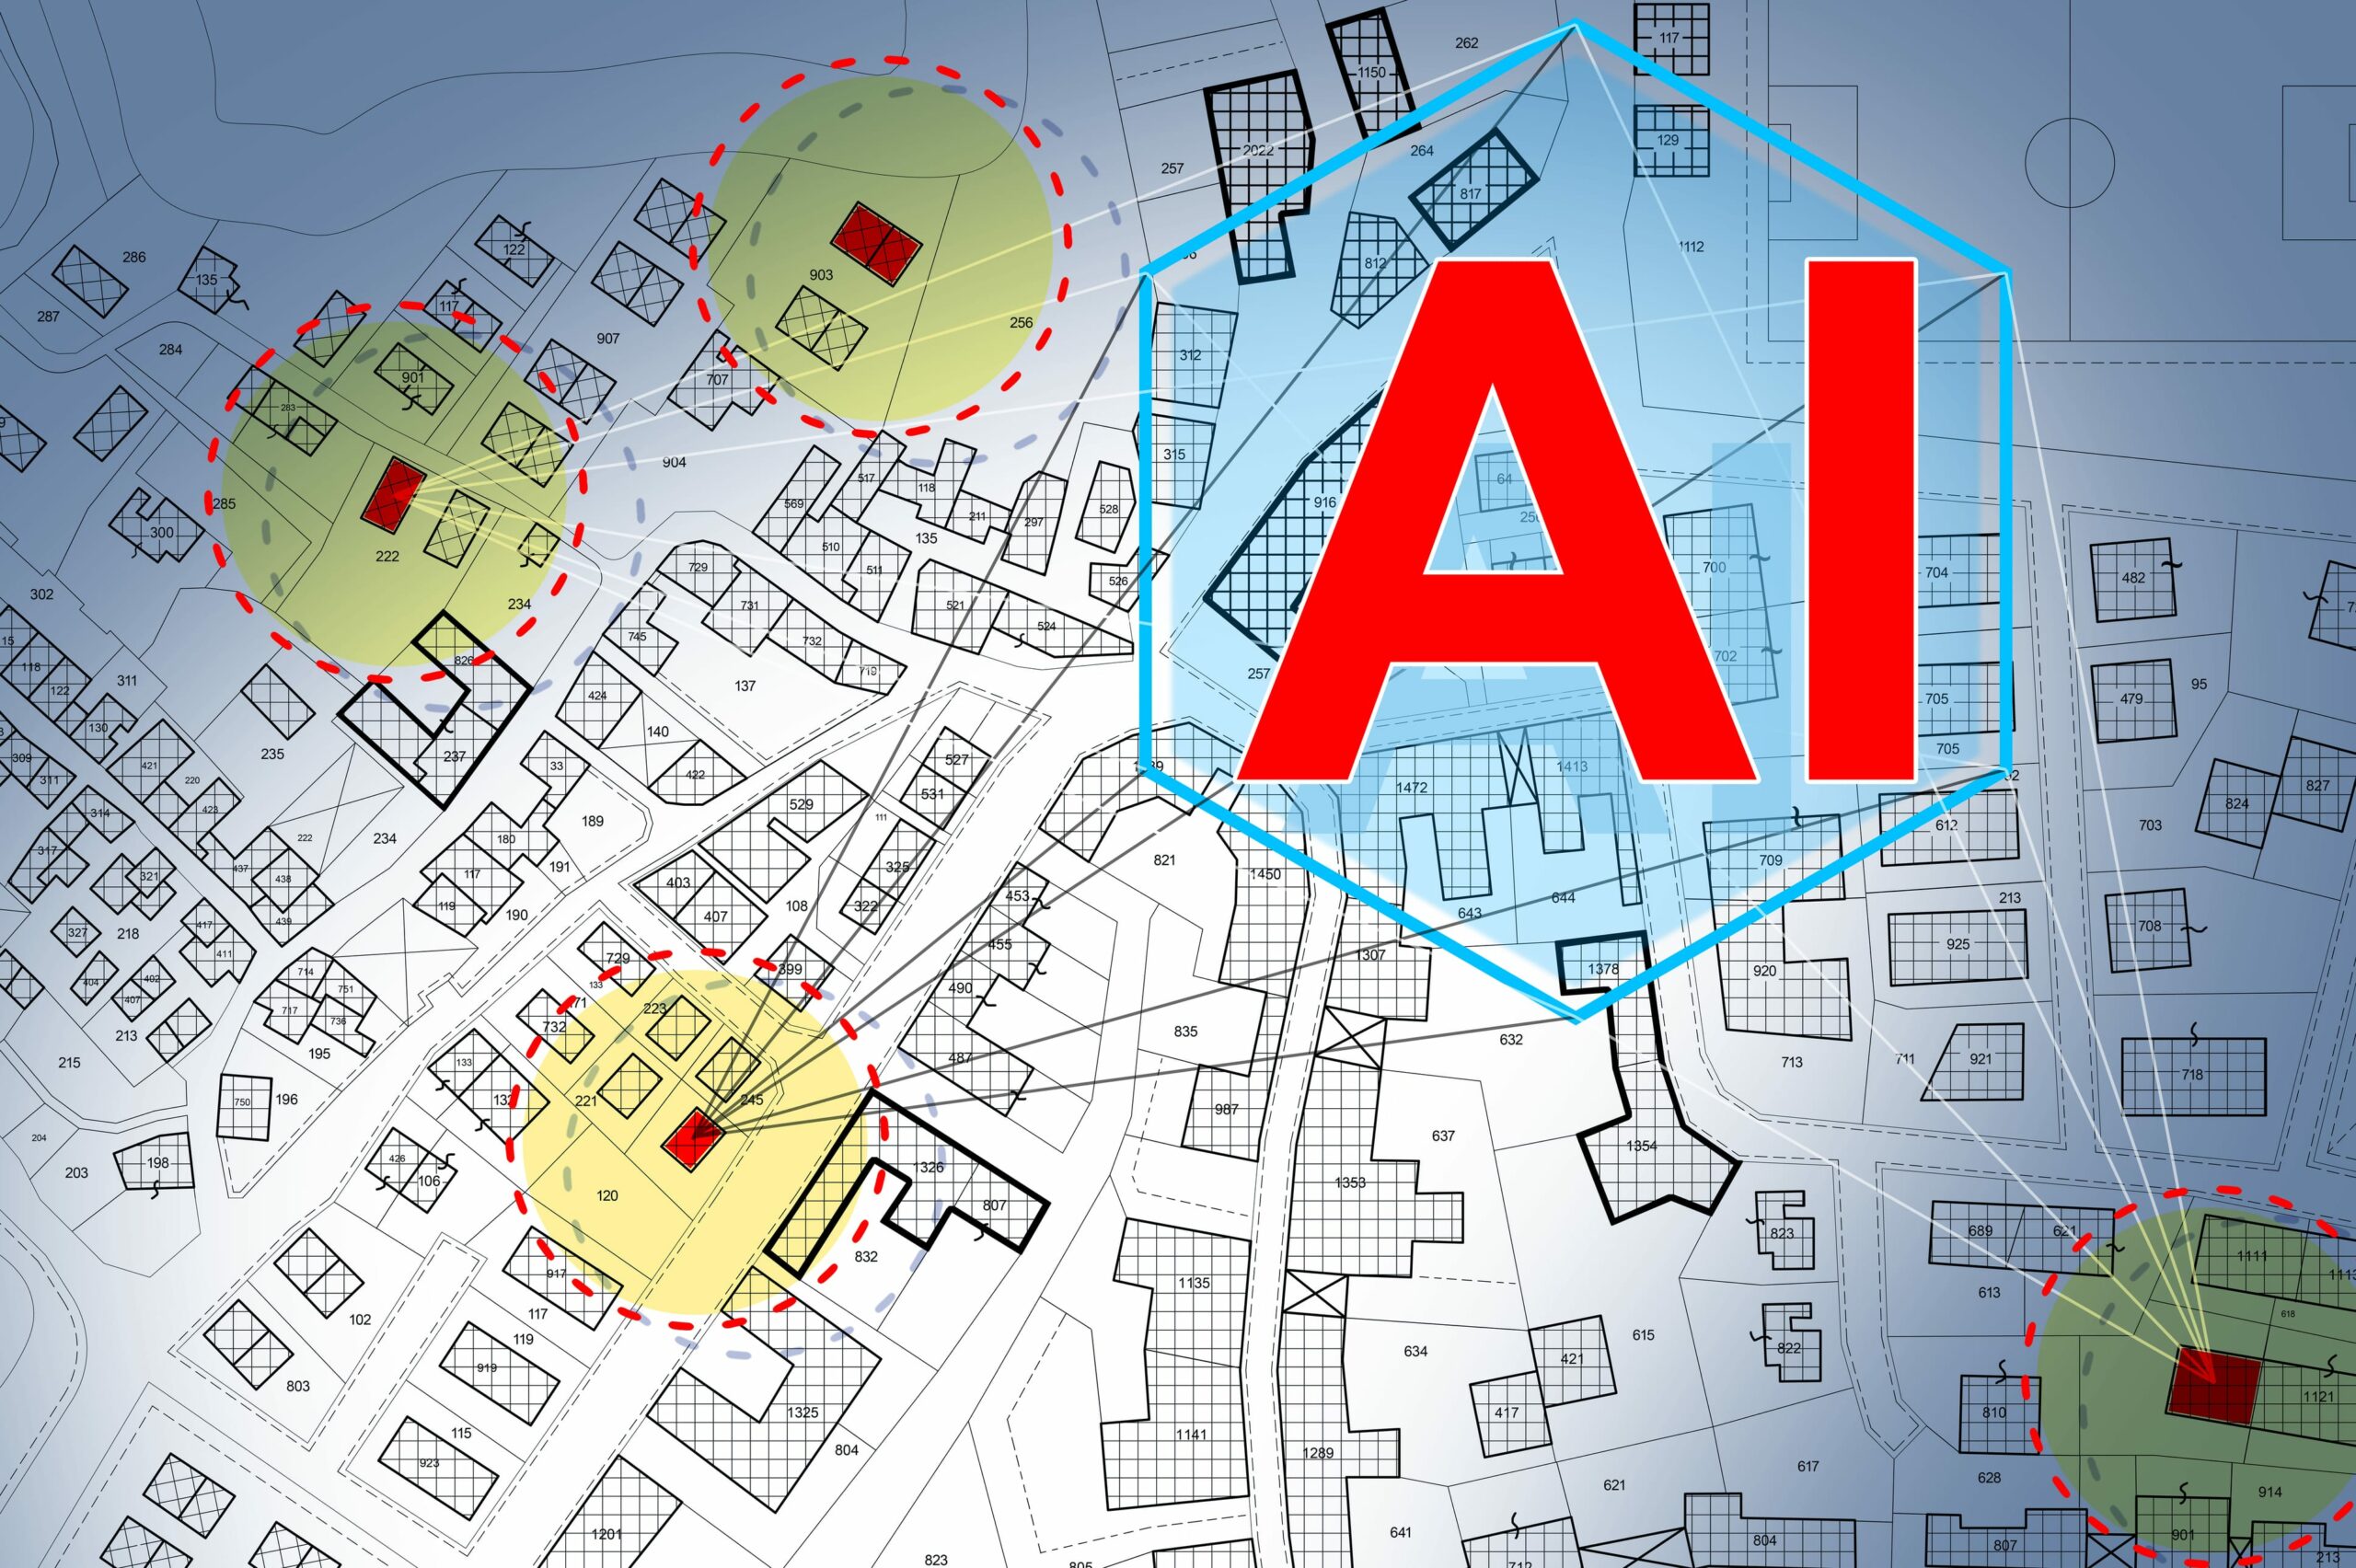 Geospatial Intelligence Meets AI: A Game-Changer or a Complex Twist?